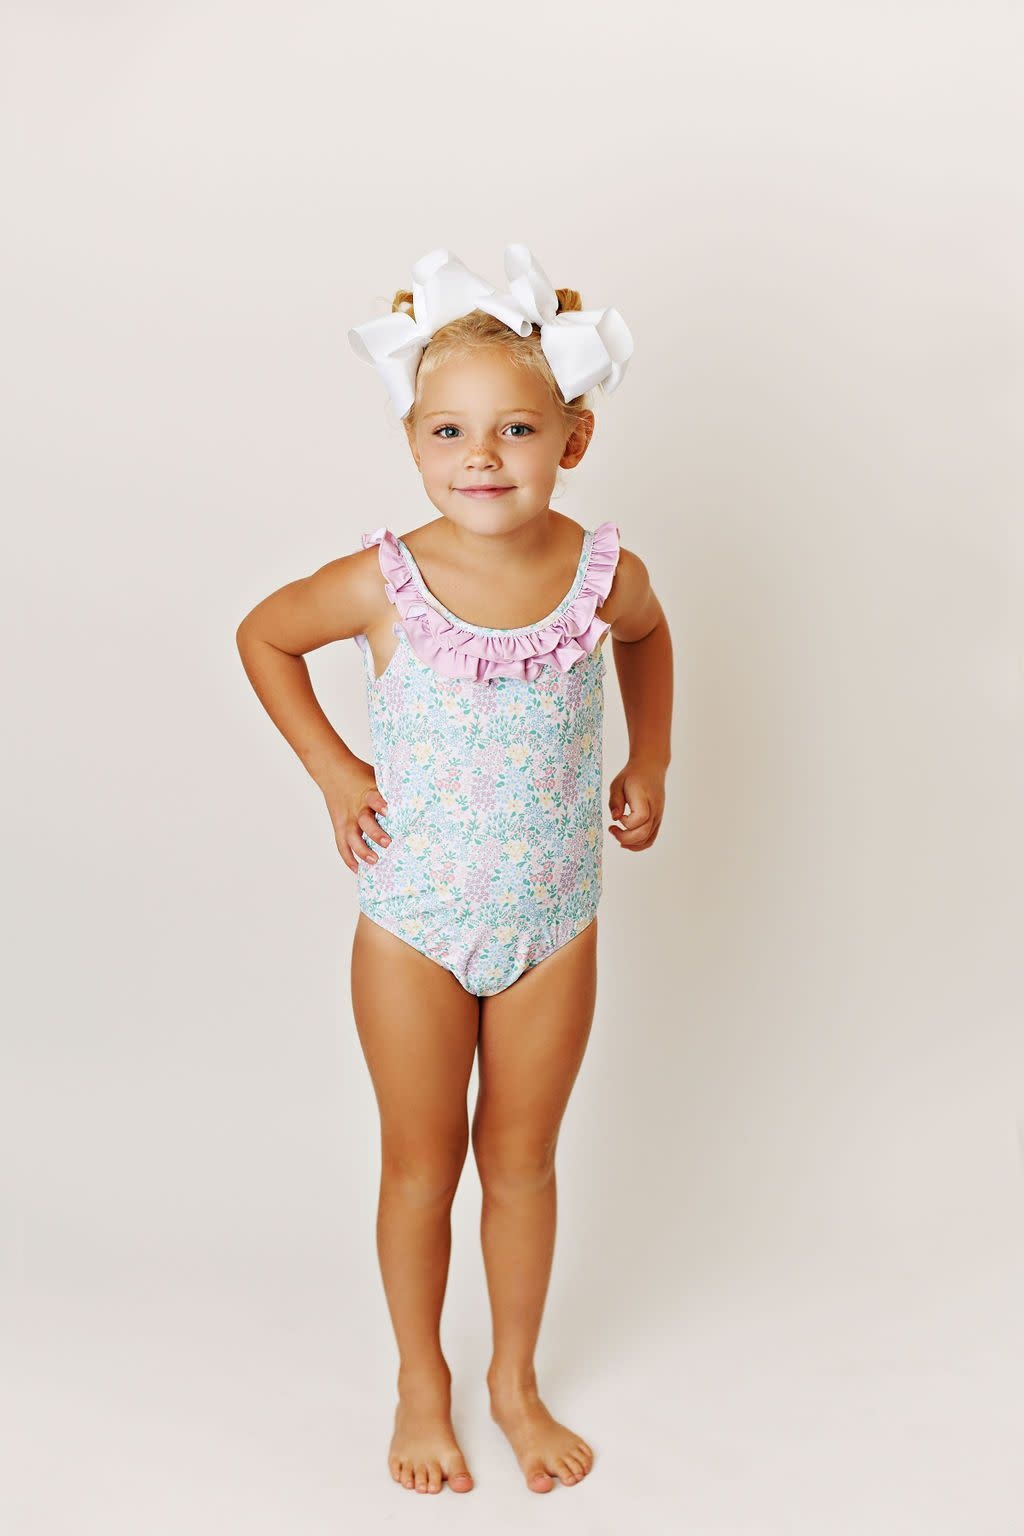 Swoon Baby Clothing Baby & Toddler Girl 1 pc Swimsuit